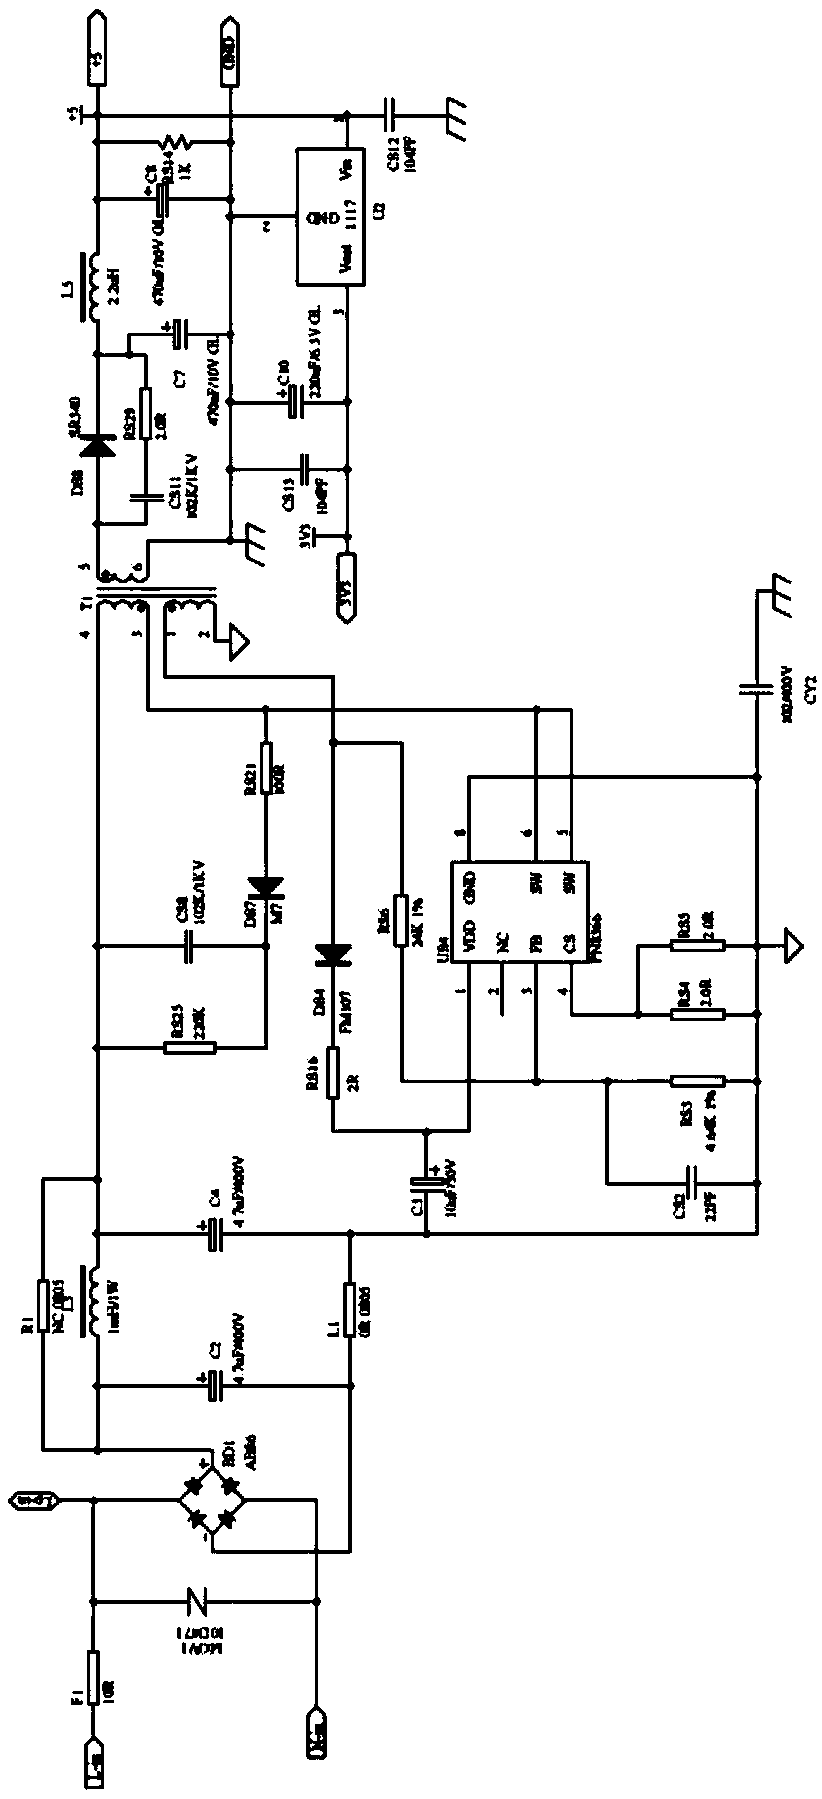 Smart socket device with safety monitoring function